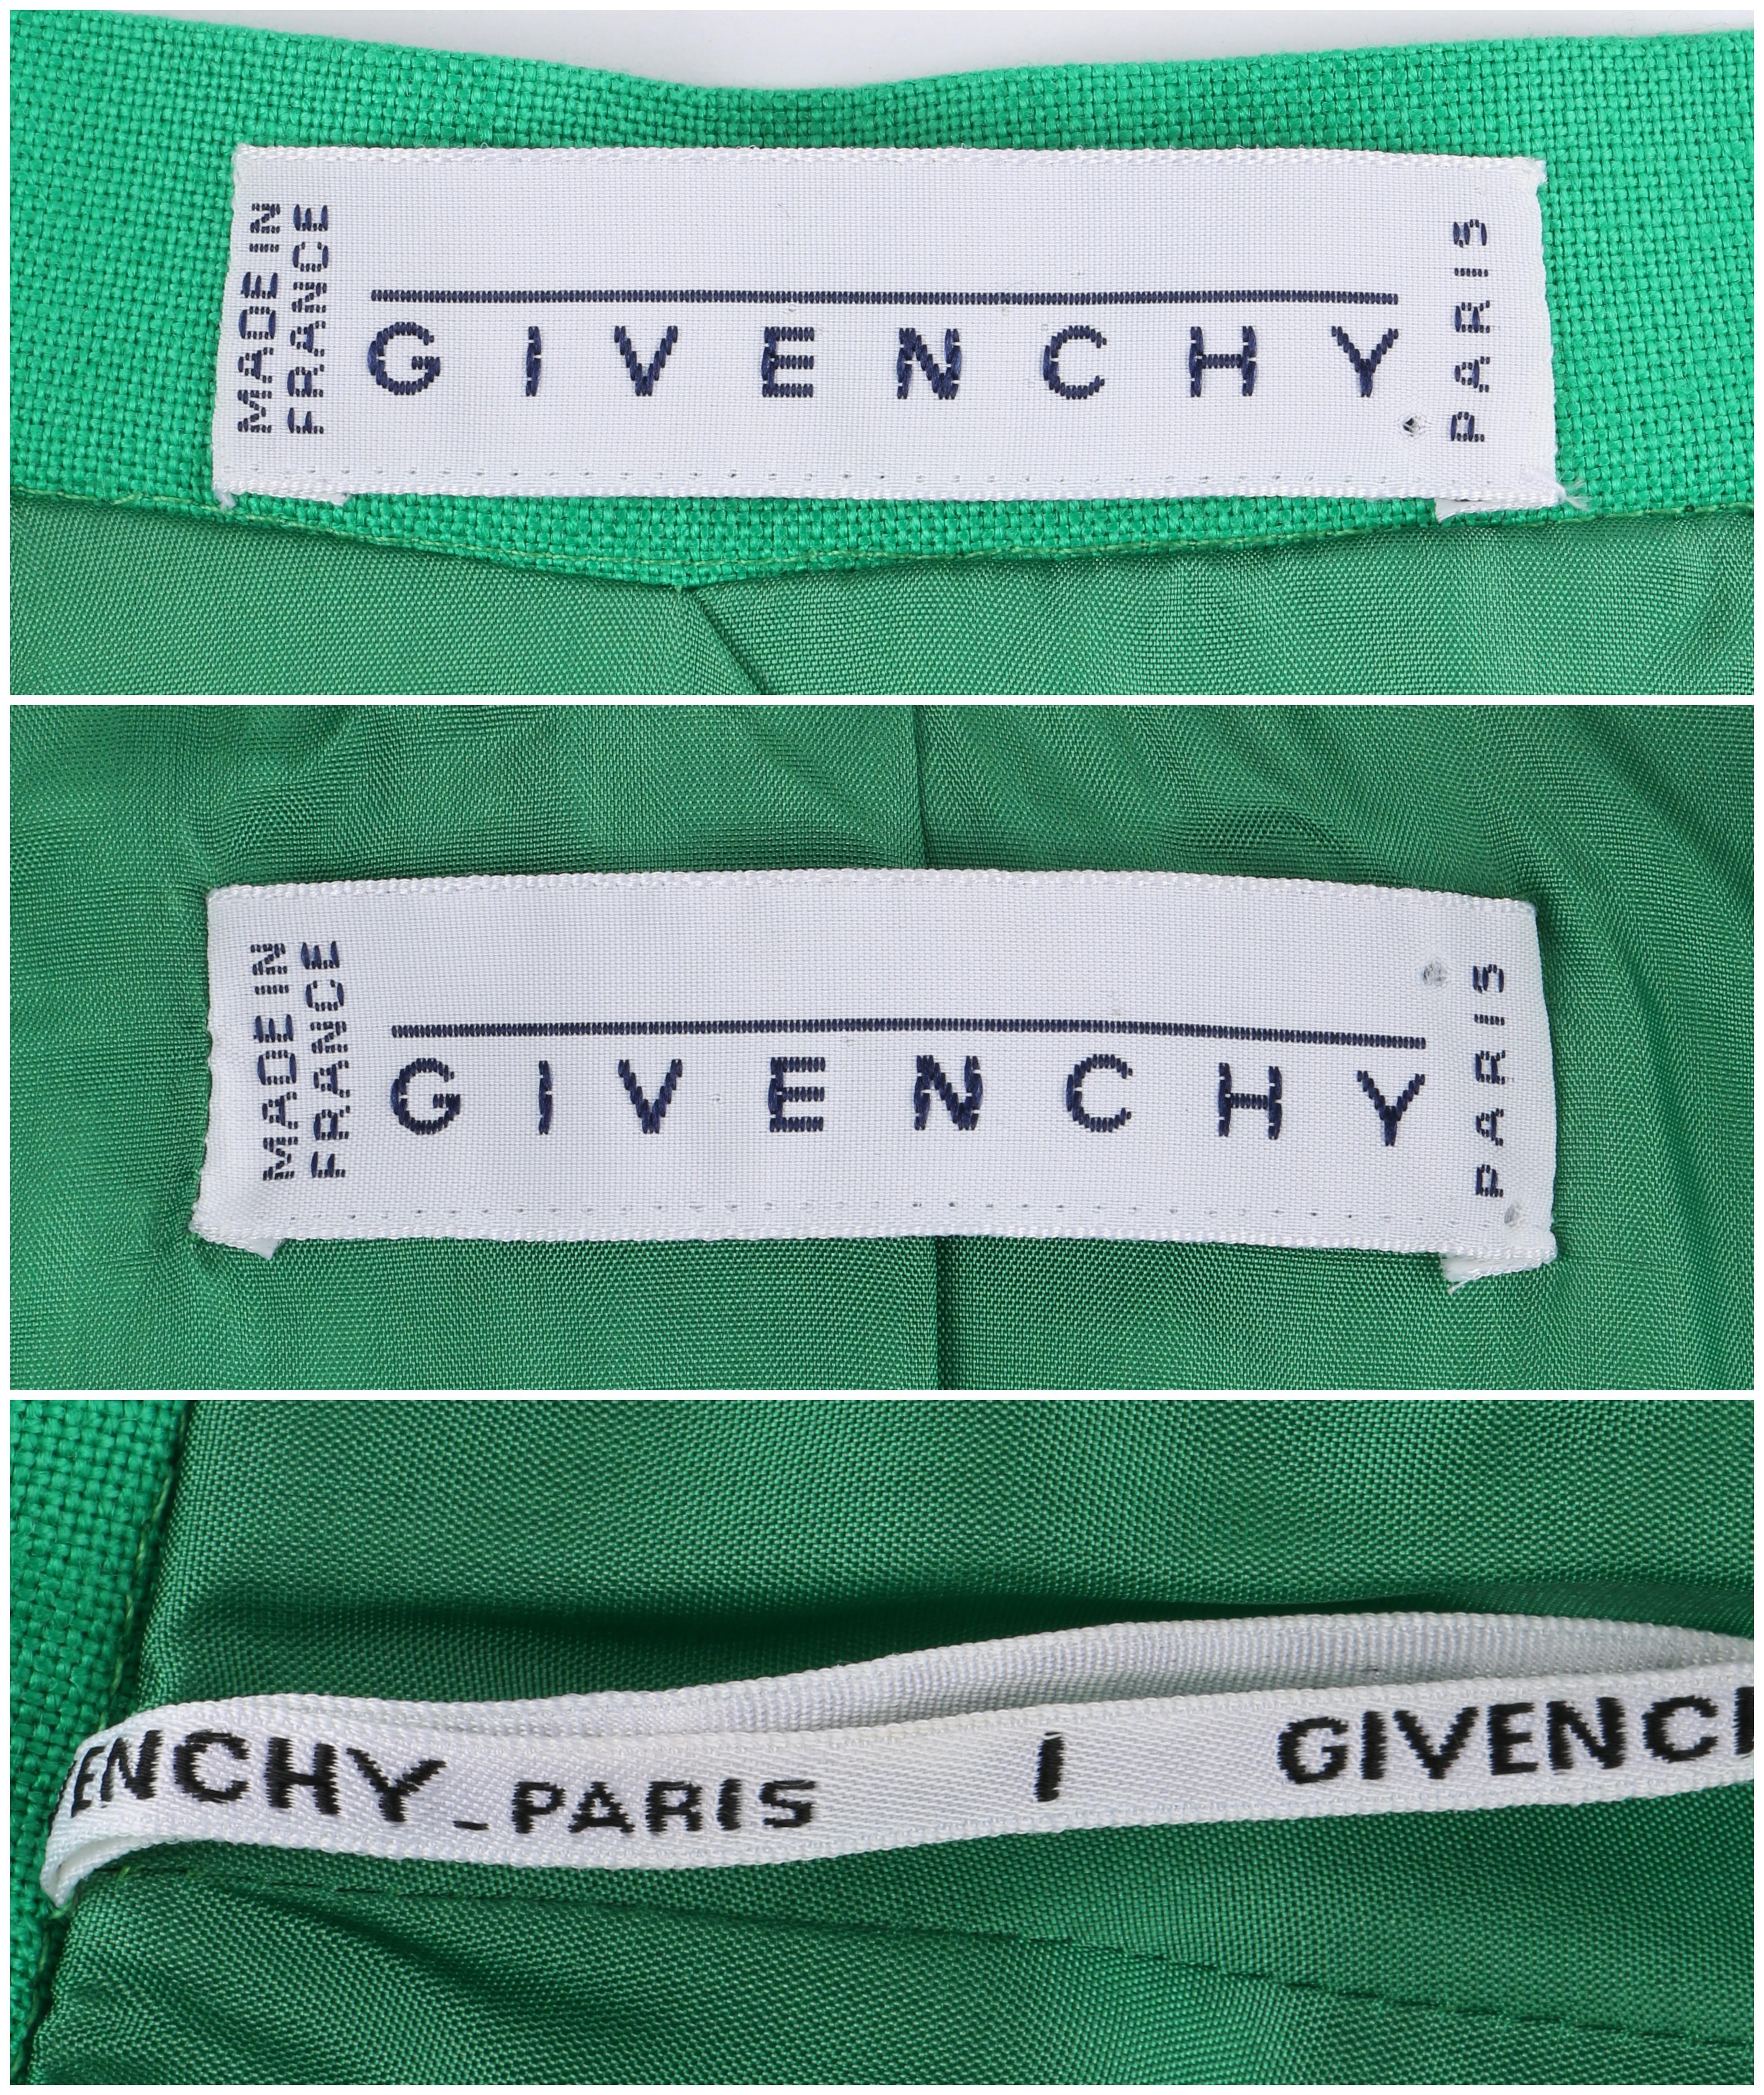 GIVENCHY S/S 1998 ALEXANDER McQUEEN 2pc Green Asymmetric Panel Skirt Suit Set For Sale 3